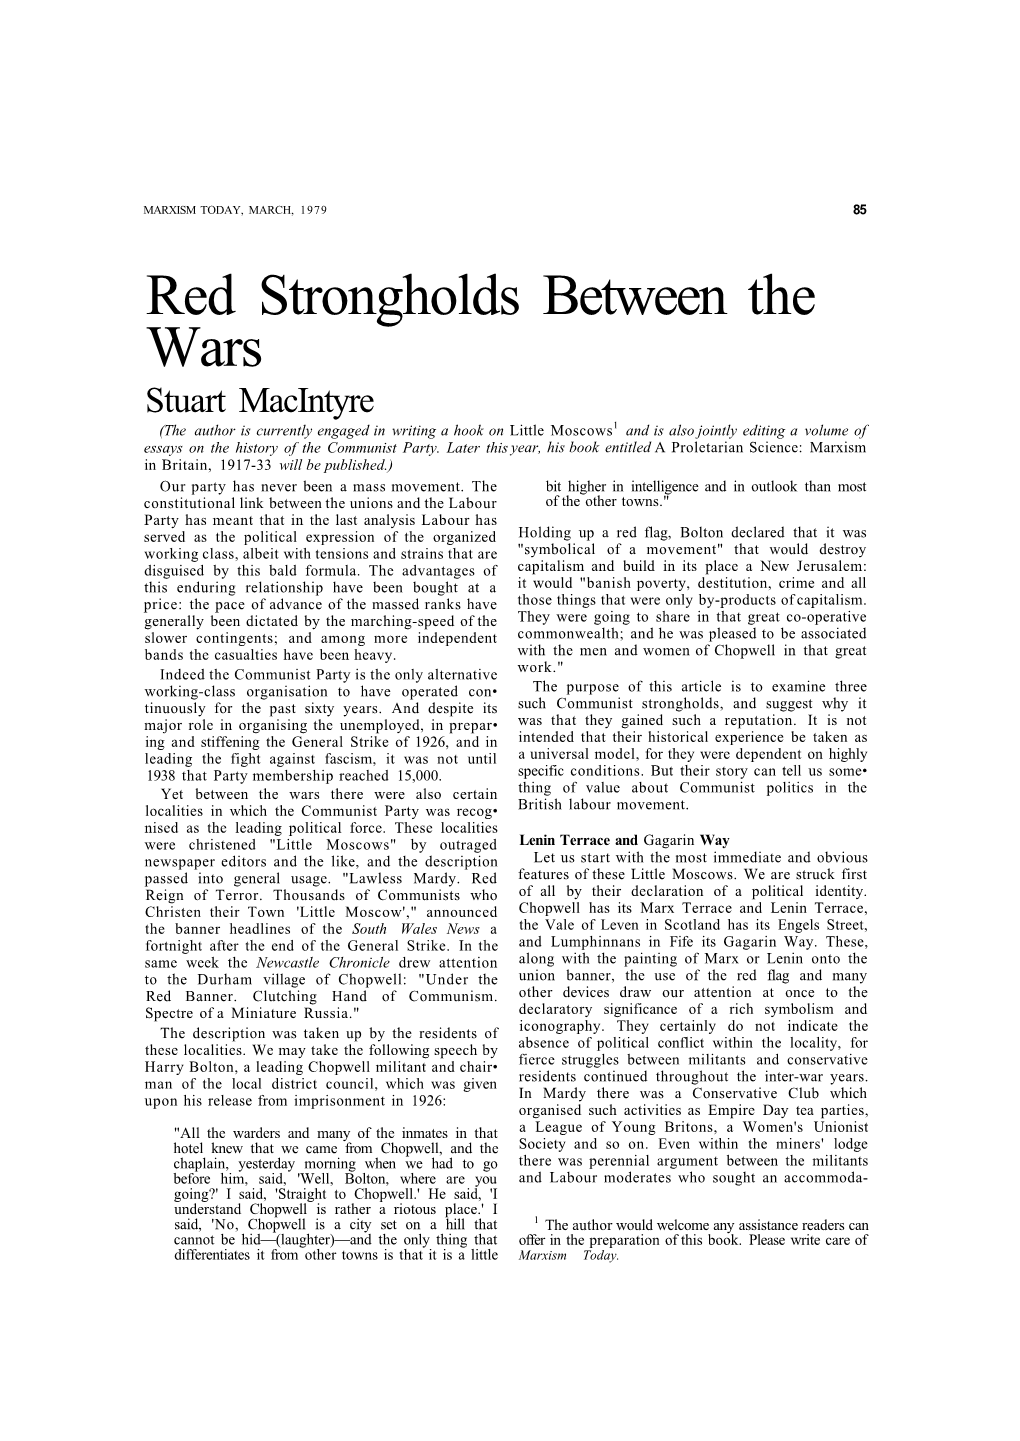 Red Strongholds Between the Wars